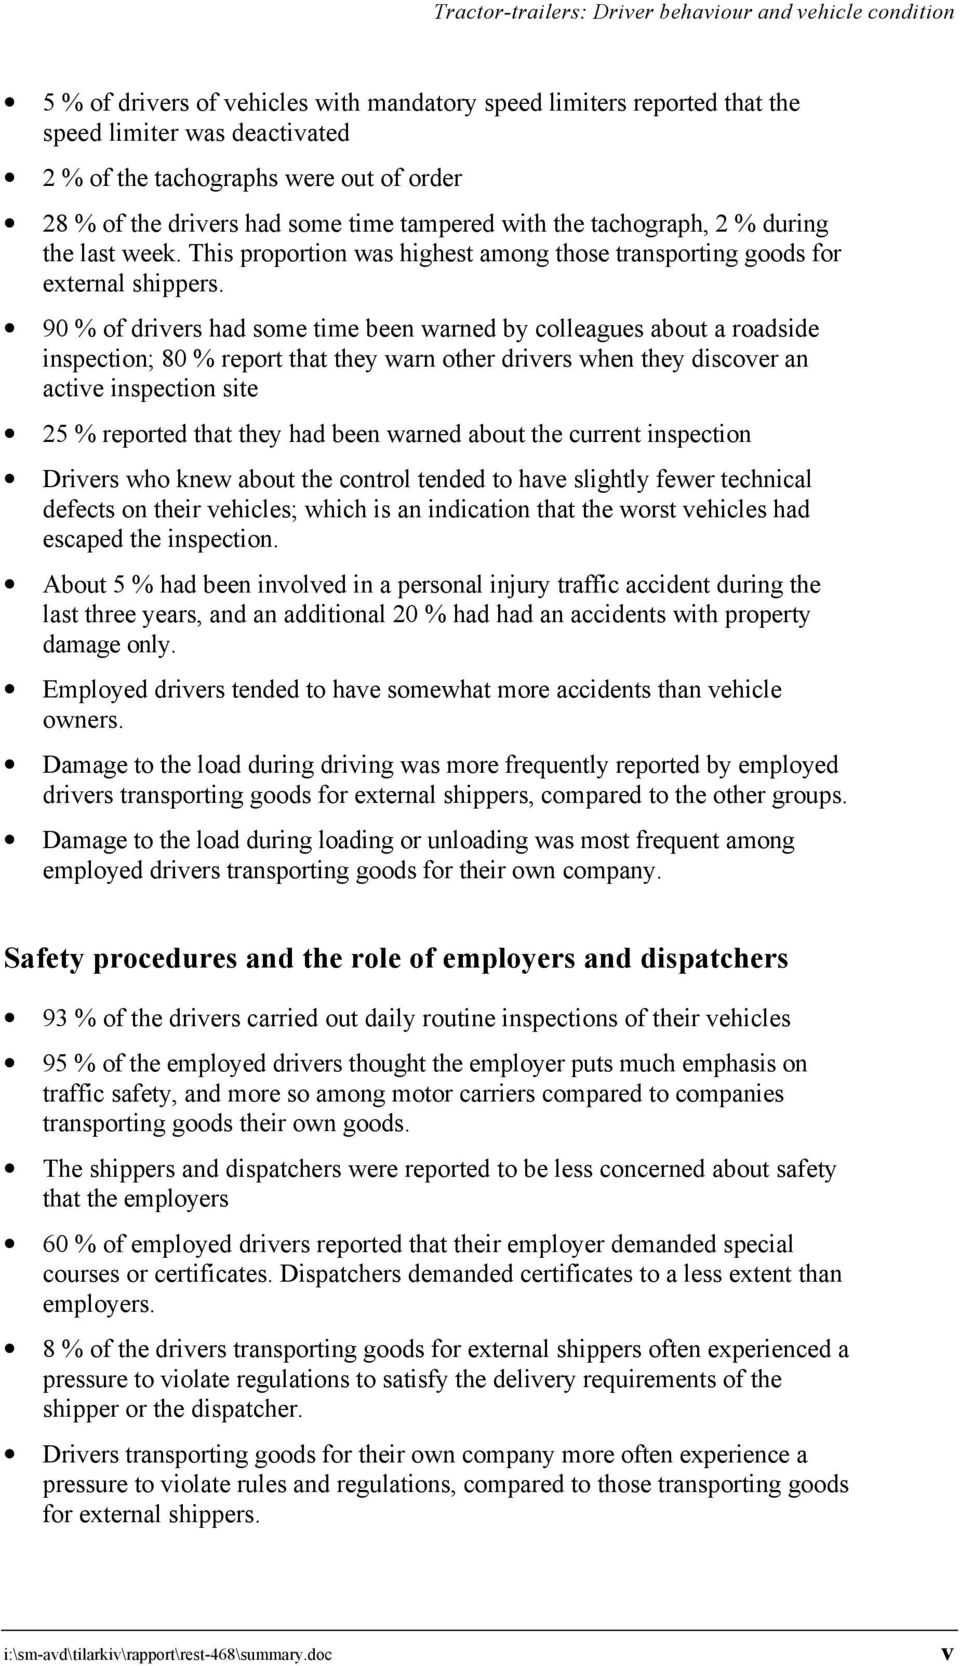 90 % of drivers had some time been warned by colleagues about a roadside inspection; 80 % report that they warn other drivers when they discover an active inspection site 25 % reported that they had